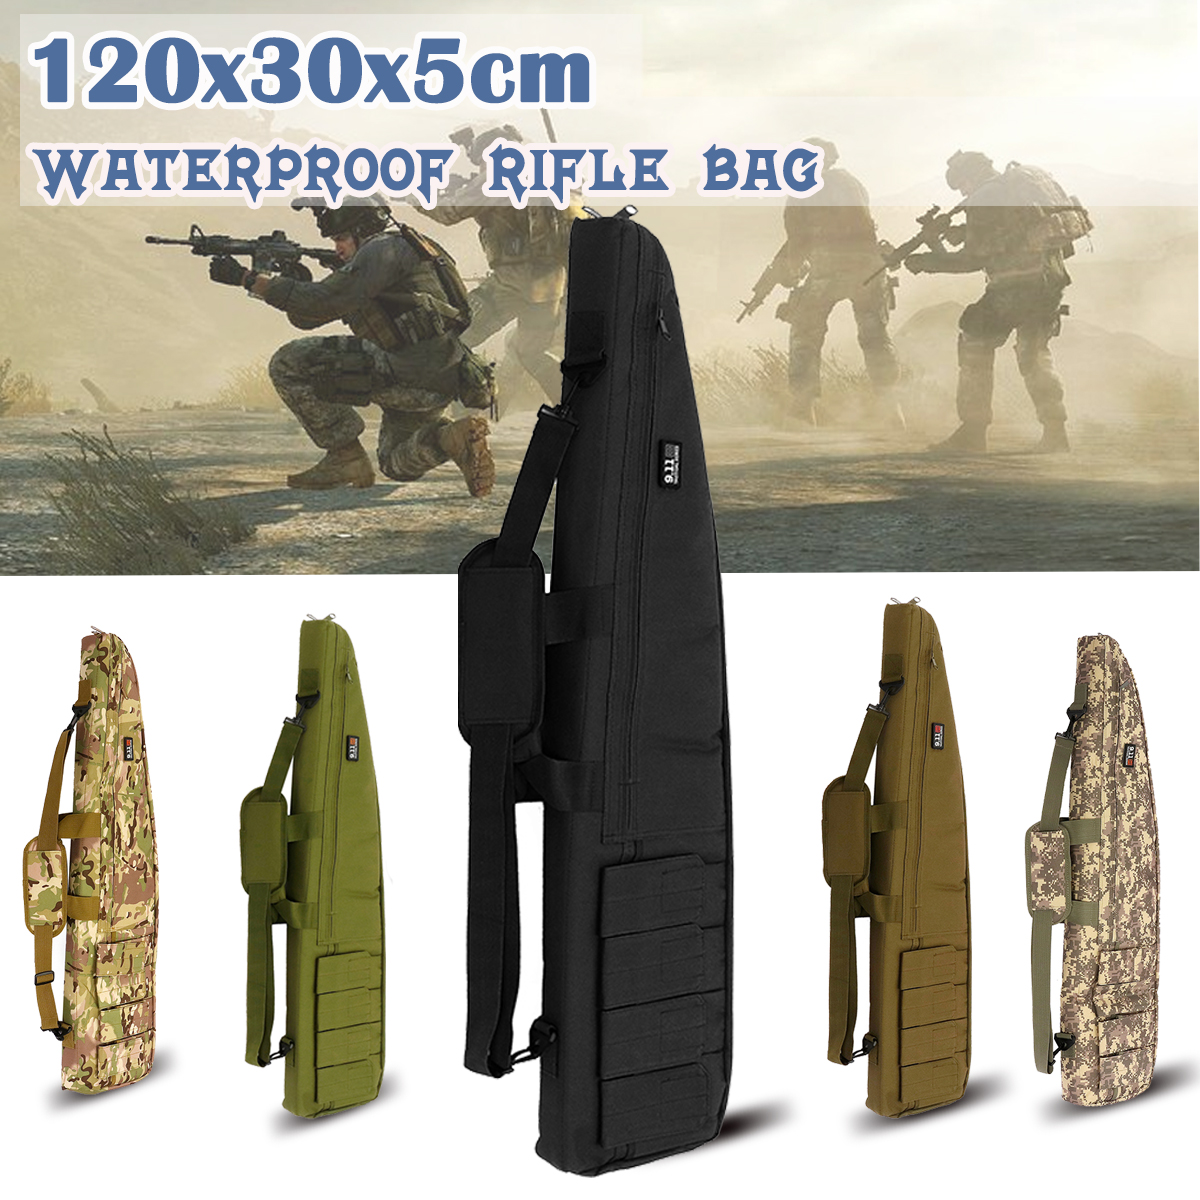 120x30x5cm-Outdoor-Tactical-Bag-CS-Airsoft-Protection-Case-Tactical-Package-Heavy-Duty-Hunting-Acces-1522810-1